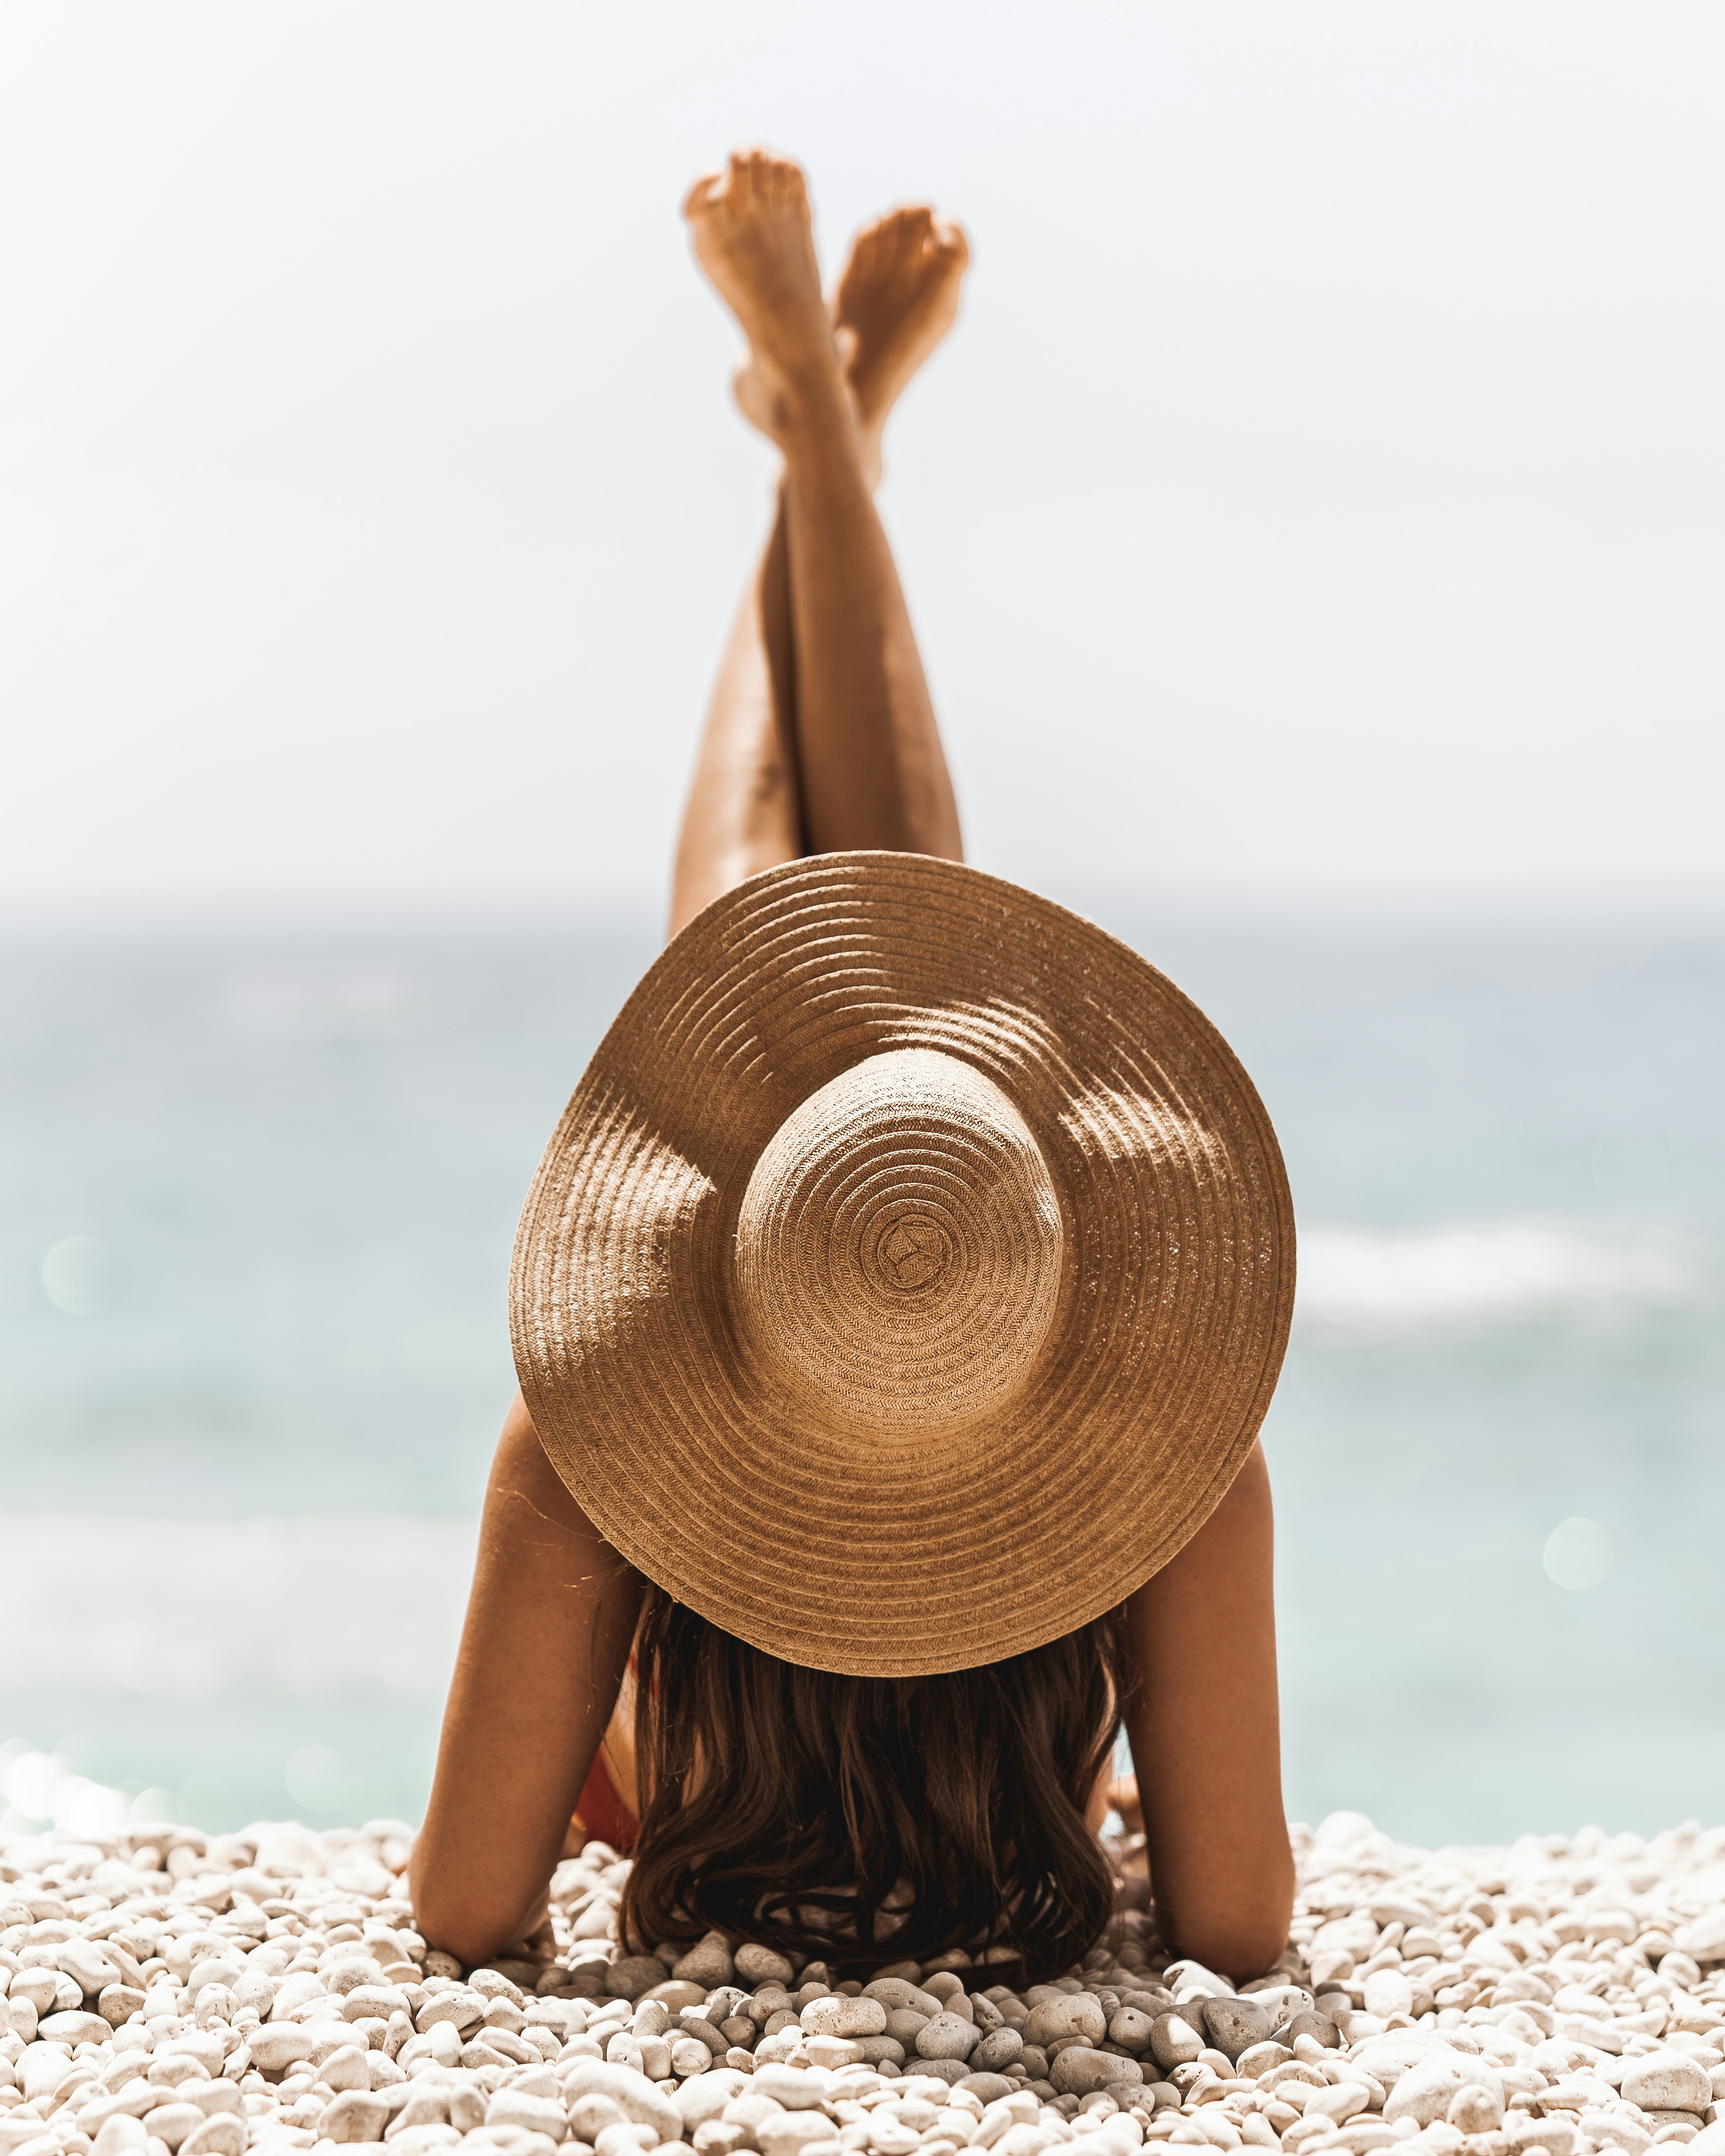 500+ Woman Beach Pictures Download Free Images on Unsplash photo